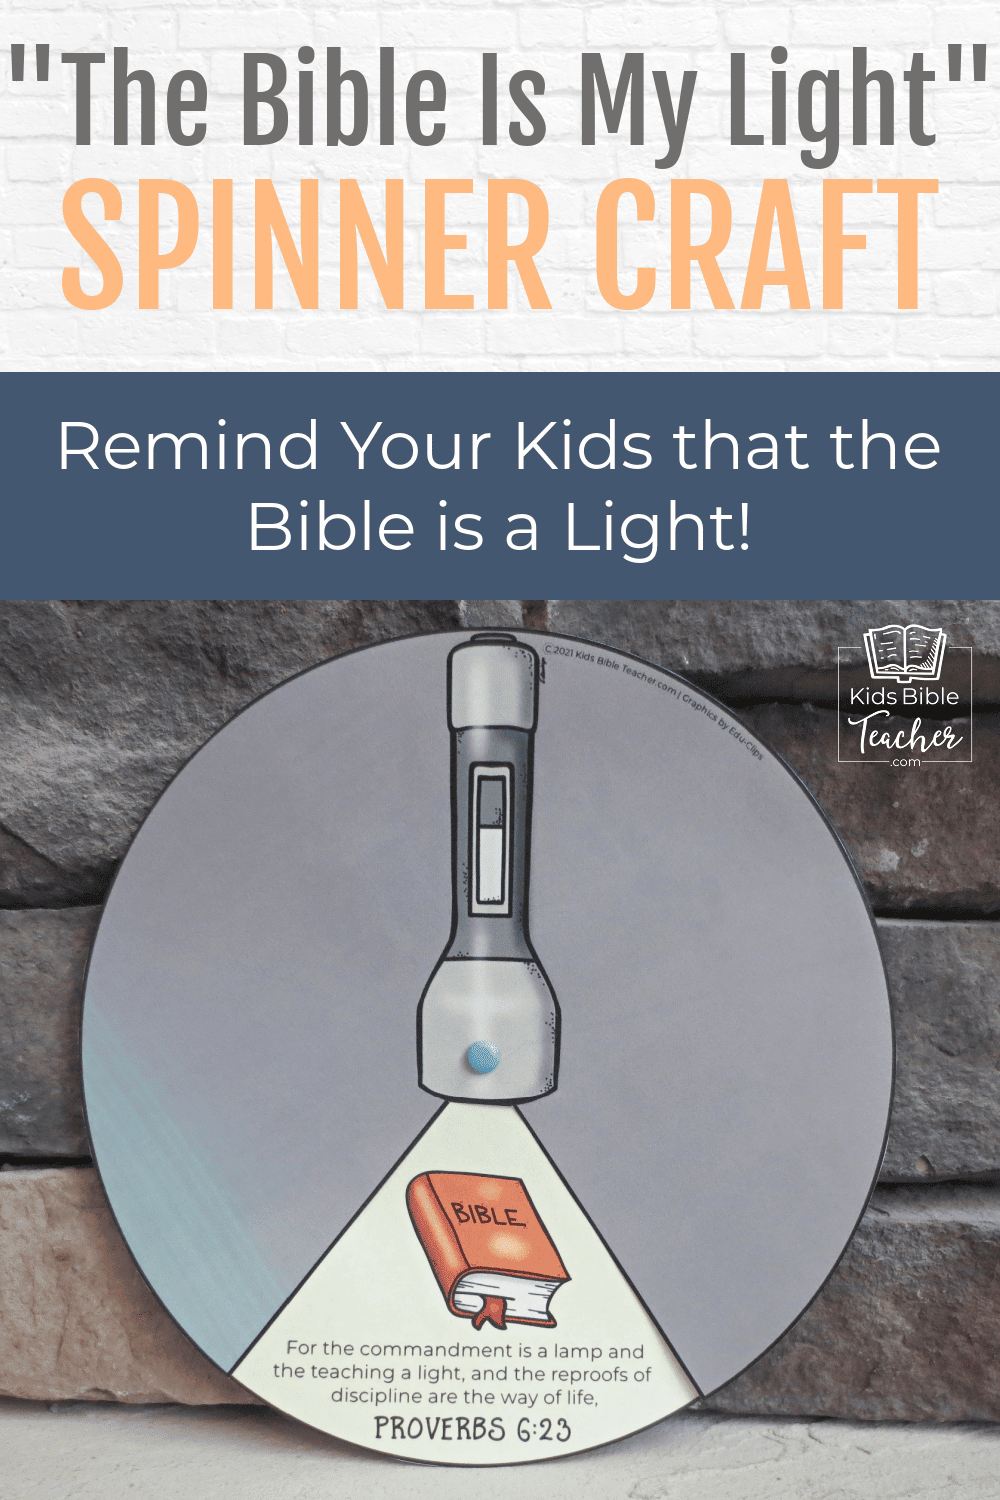 This simple The Bible is My Light spinner craft will help your kids remember that God's Word is our light in a dark world.